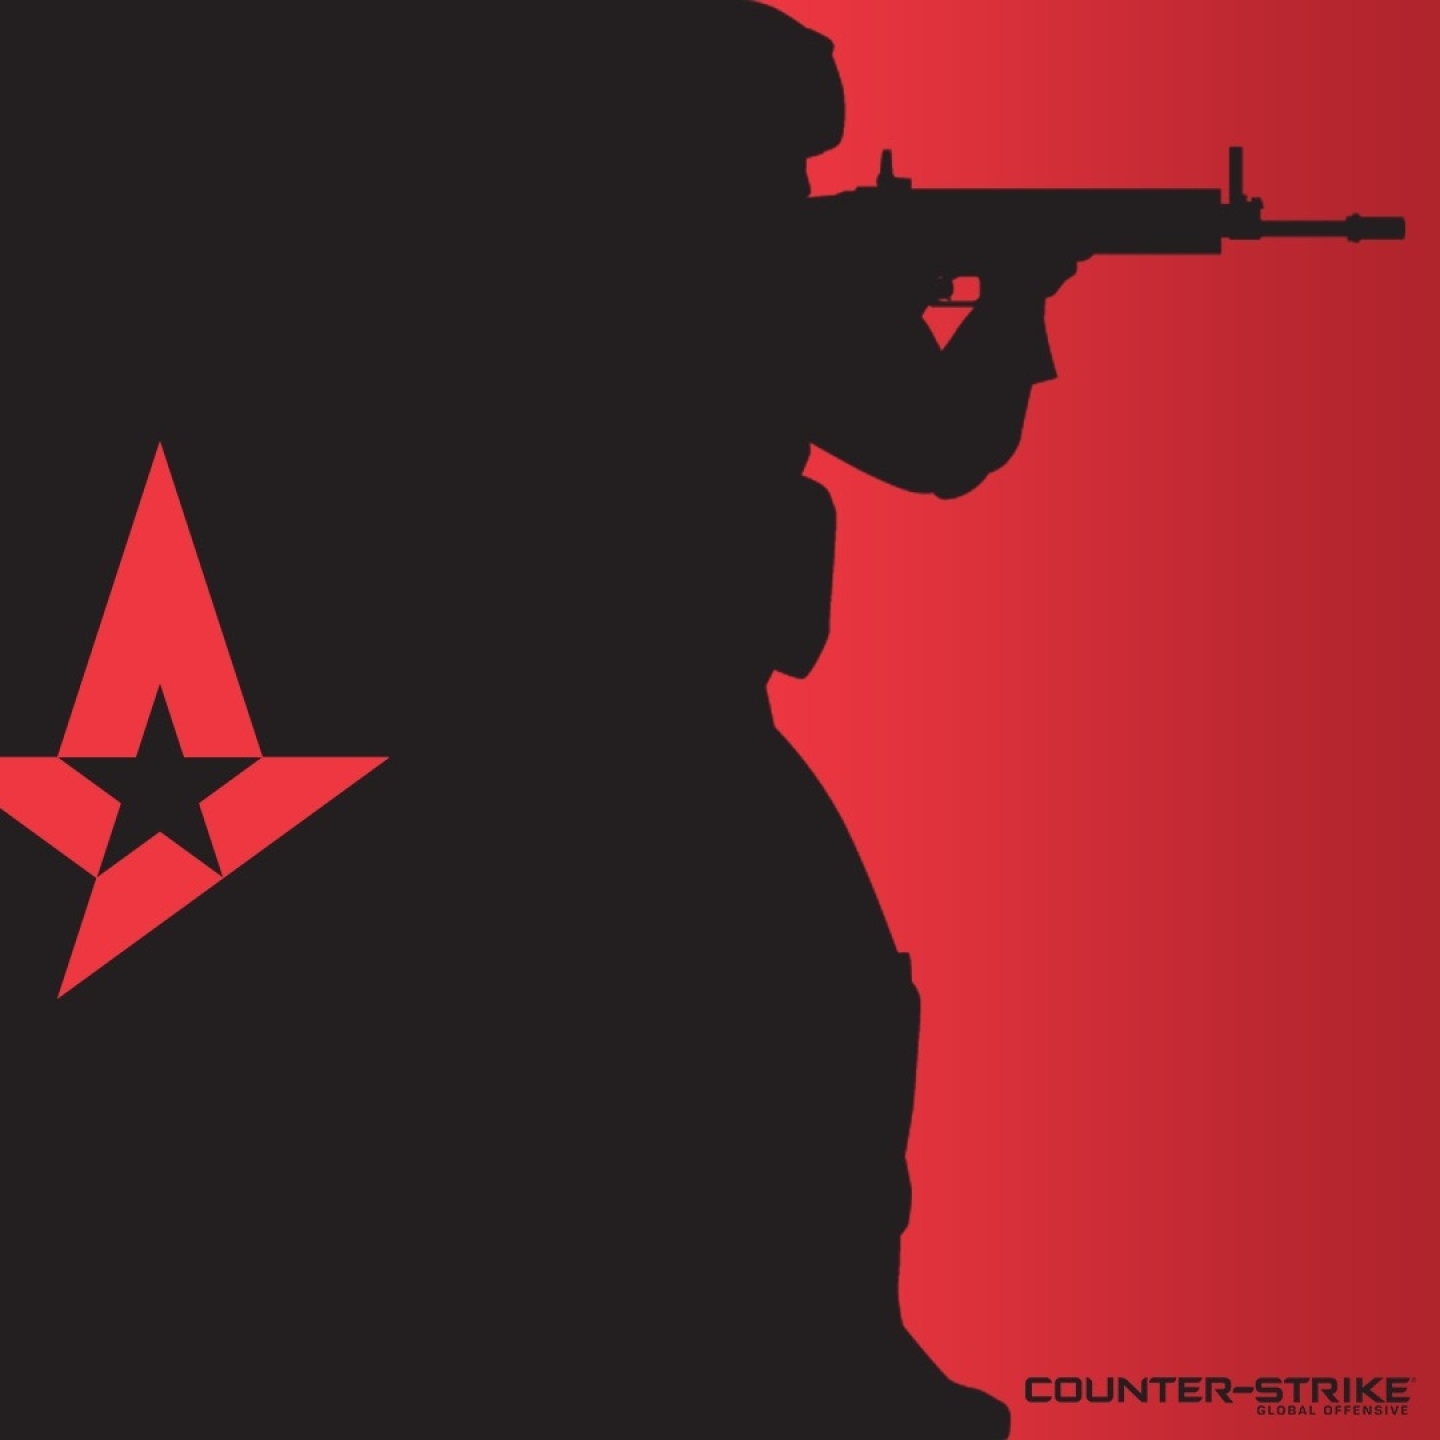 Collection 91+ Images 1440p counter-strike global offensive wallpapers Excellent